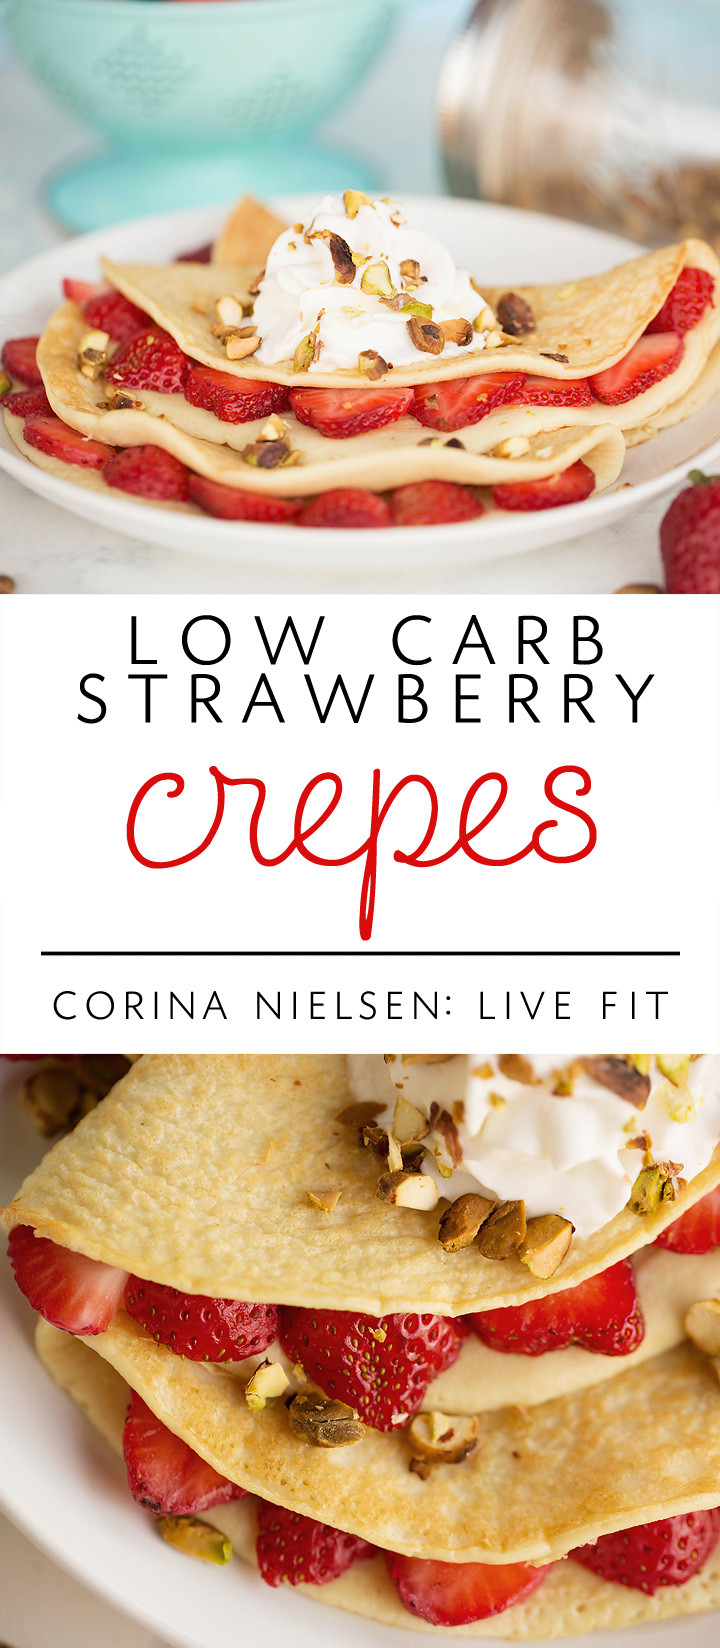 Low Carb Crepes
 Low Carb Strawberry Crepes Nourish Empower